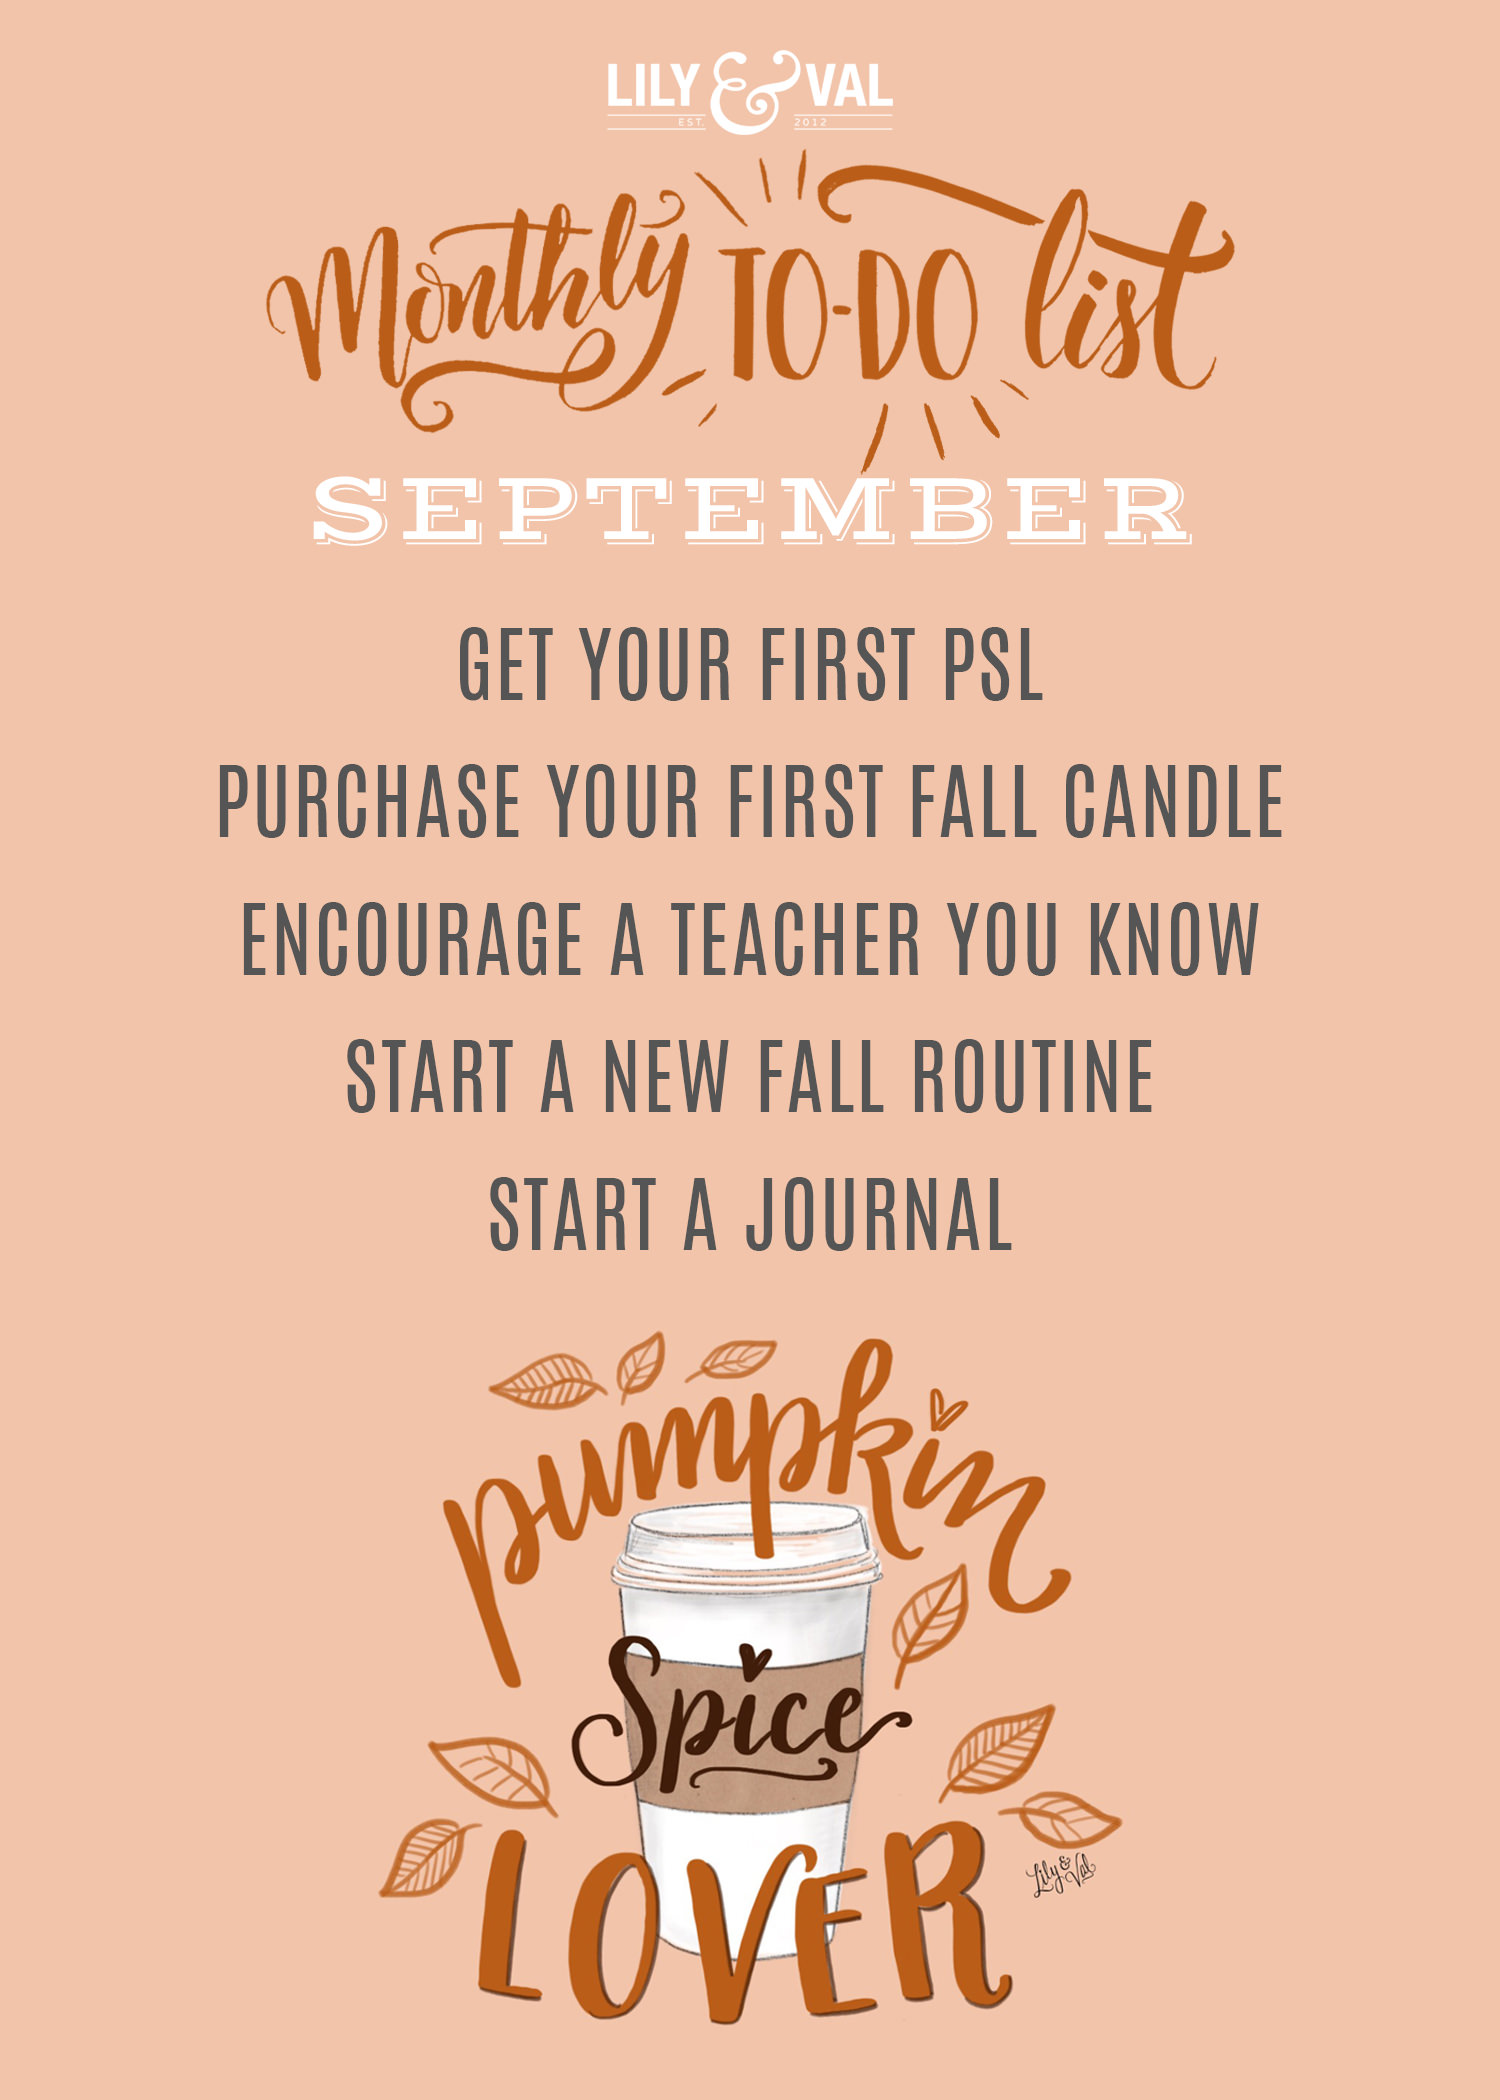 Download Lily & Val's free September to-do list to celebrate the start of Fall!